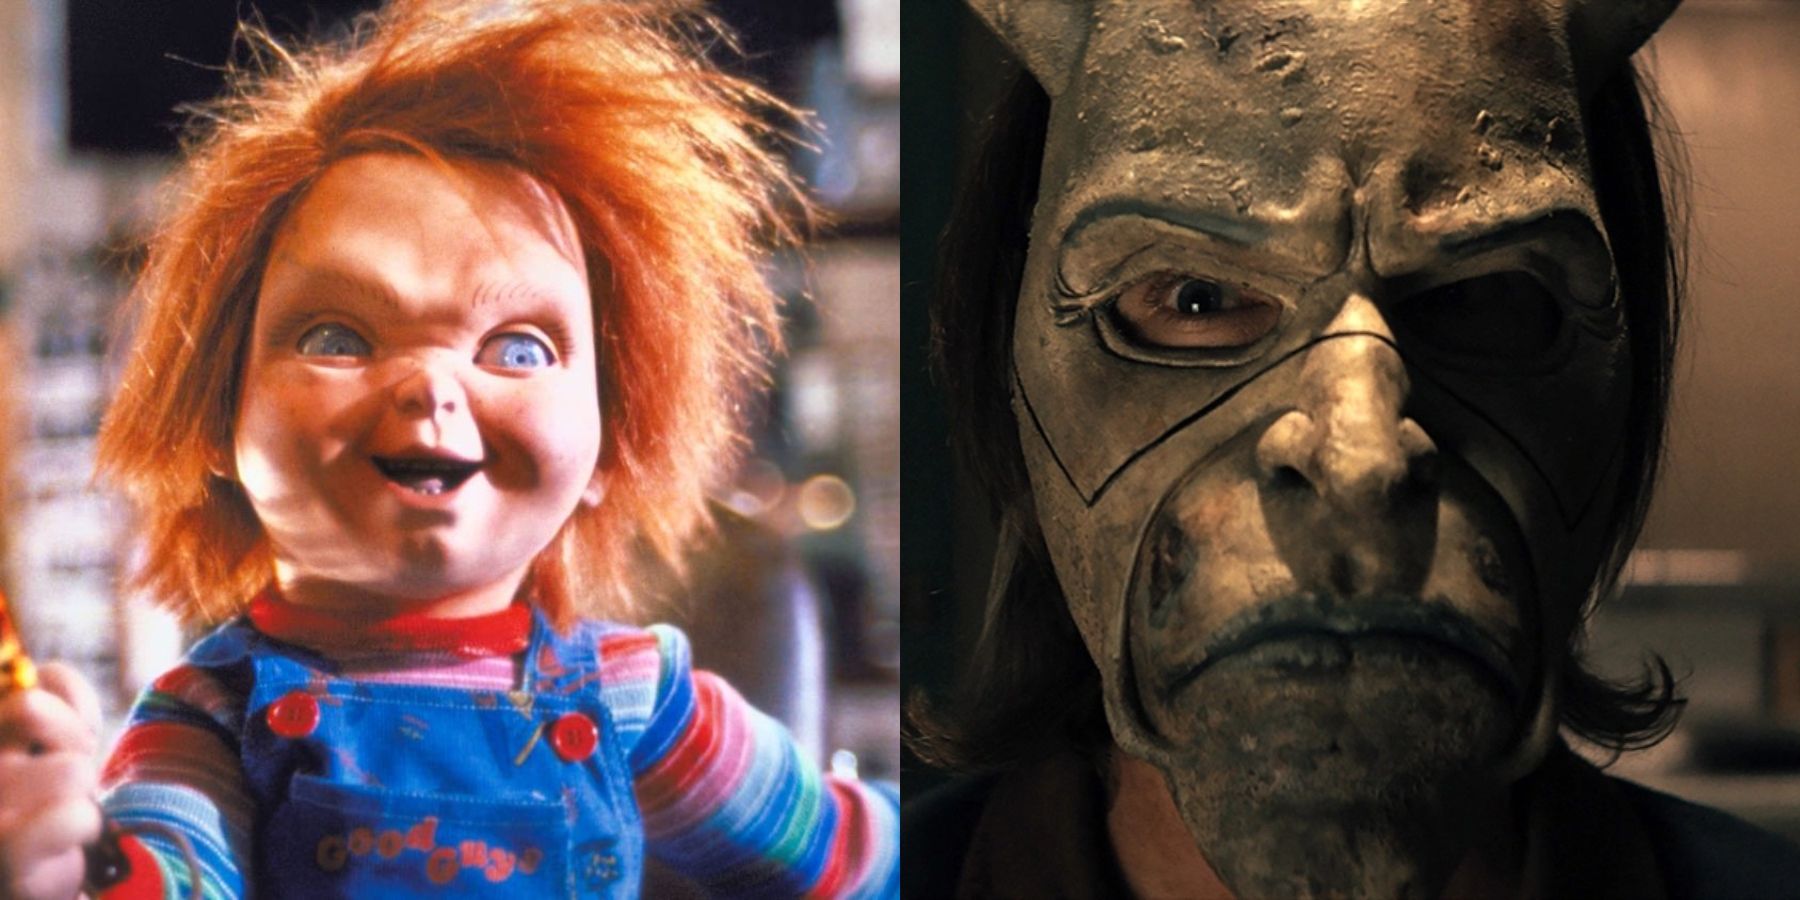 Split image of Chucky from Child's Play franchise and The Grabber (Ethan Hawke) from The Black Phone